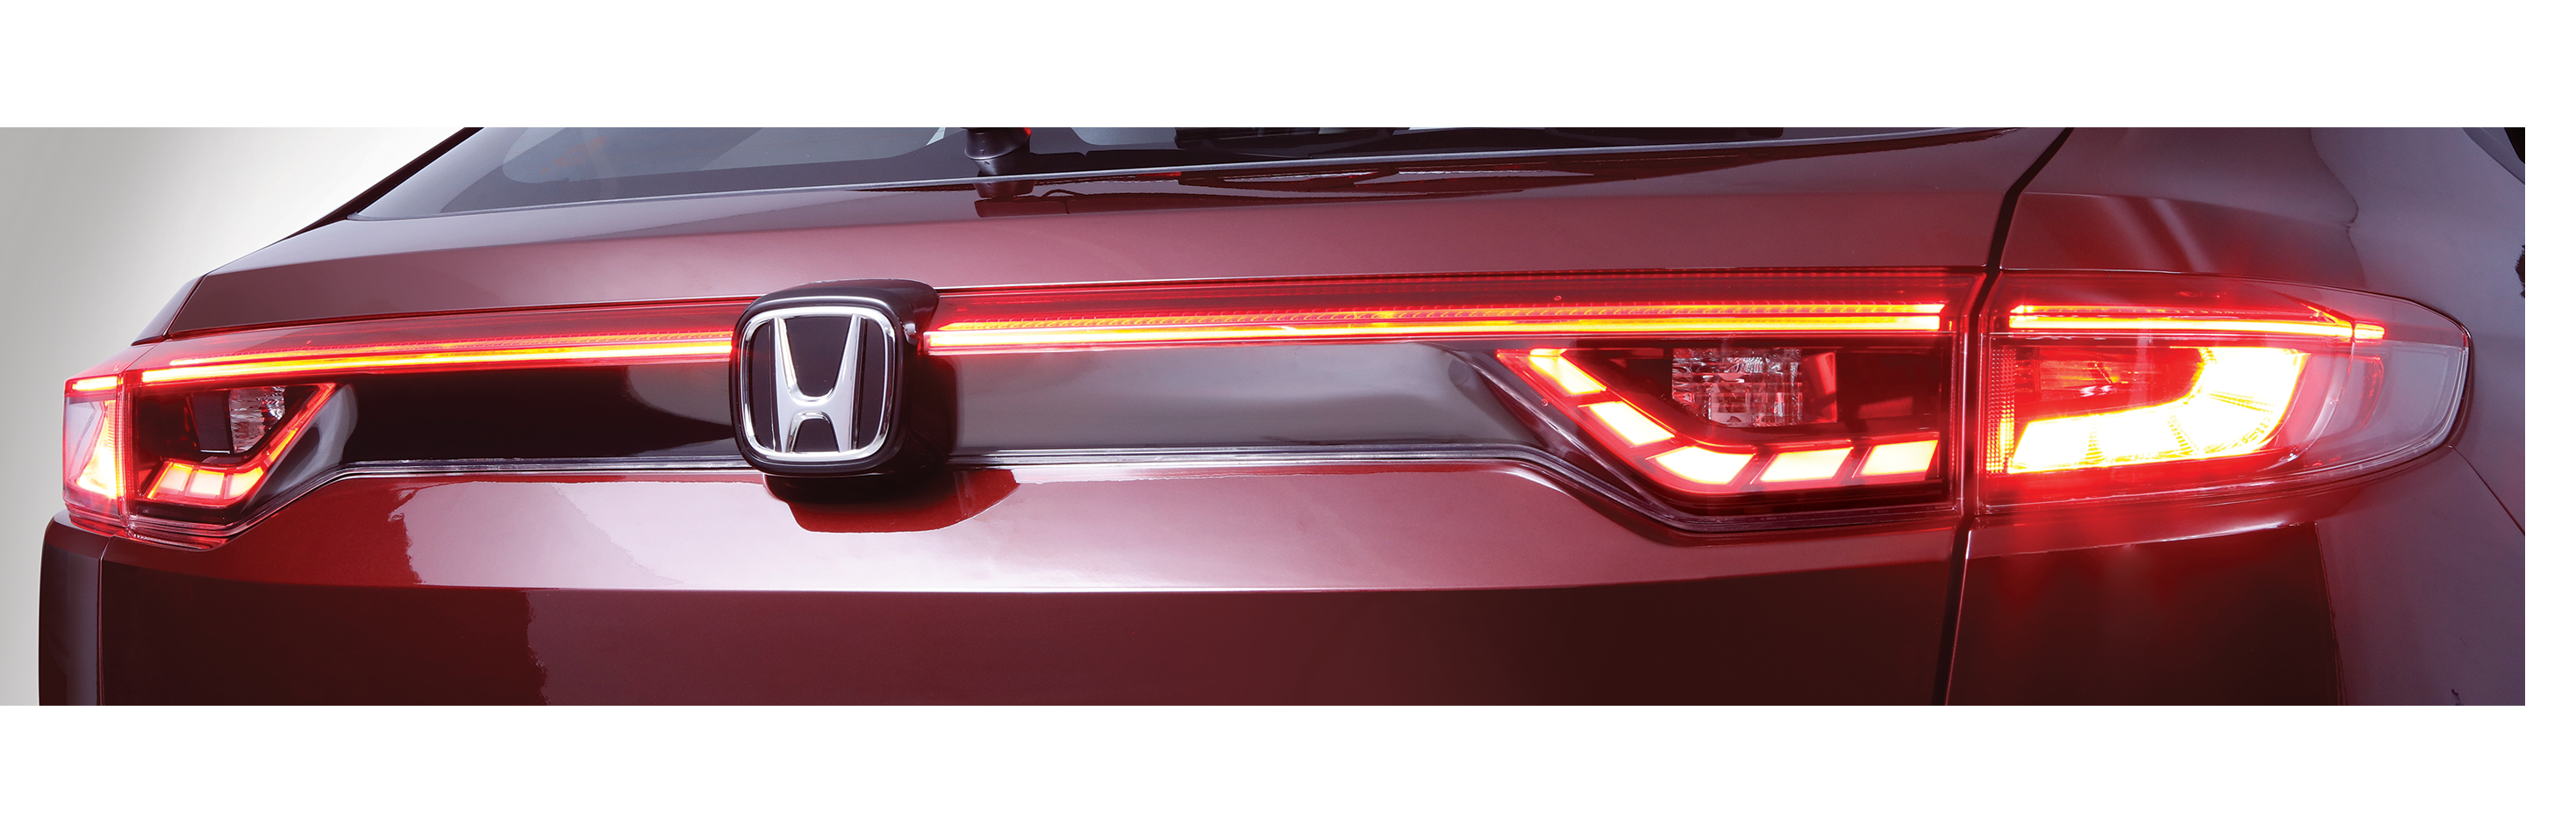 red-and-clear-led-rear-lights